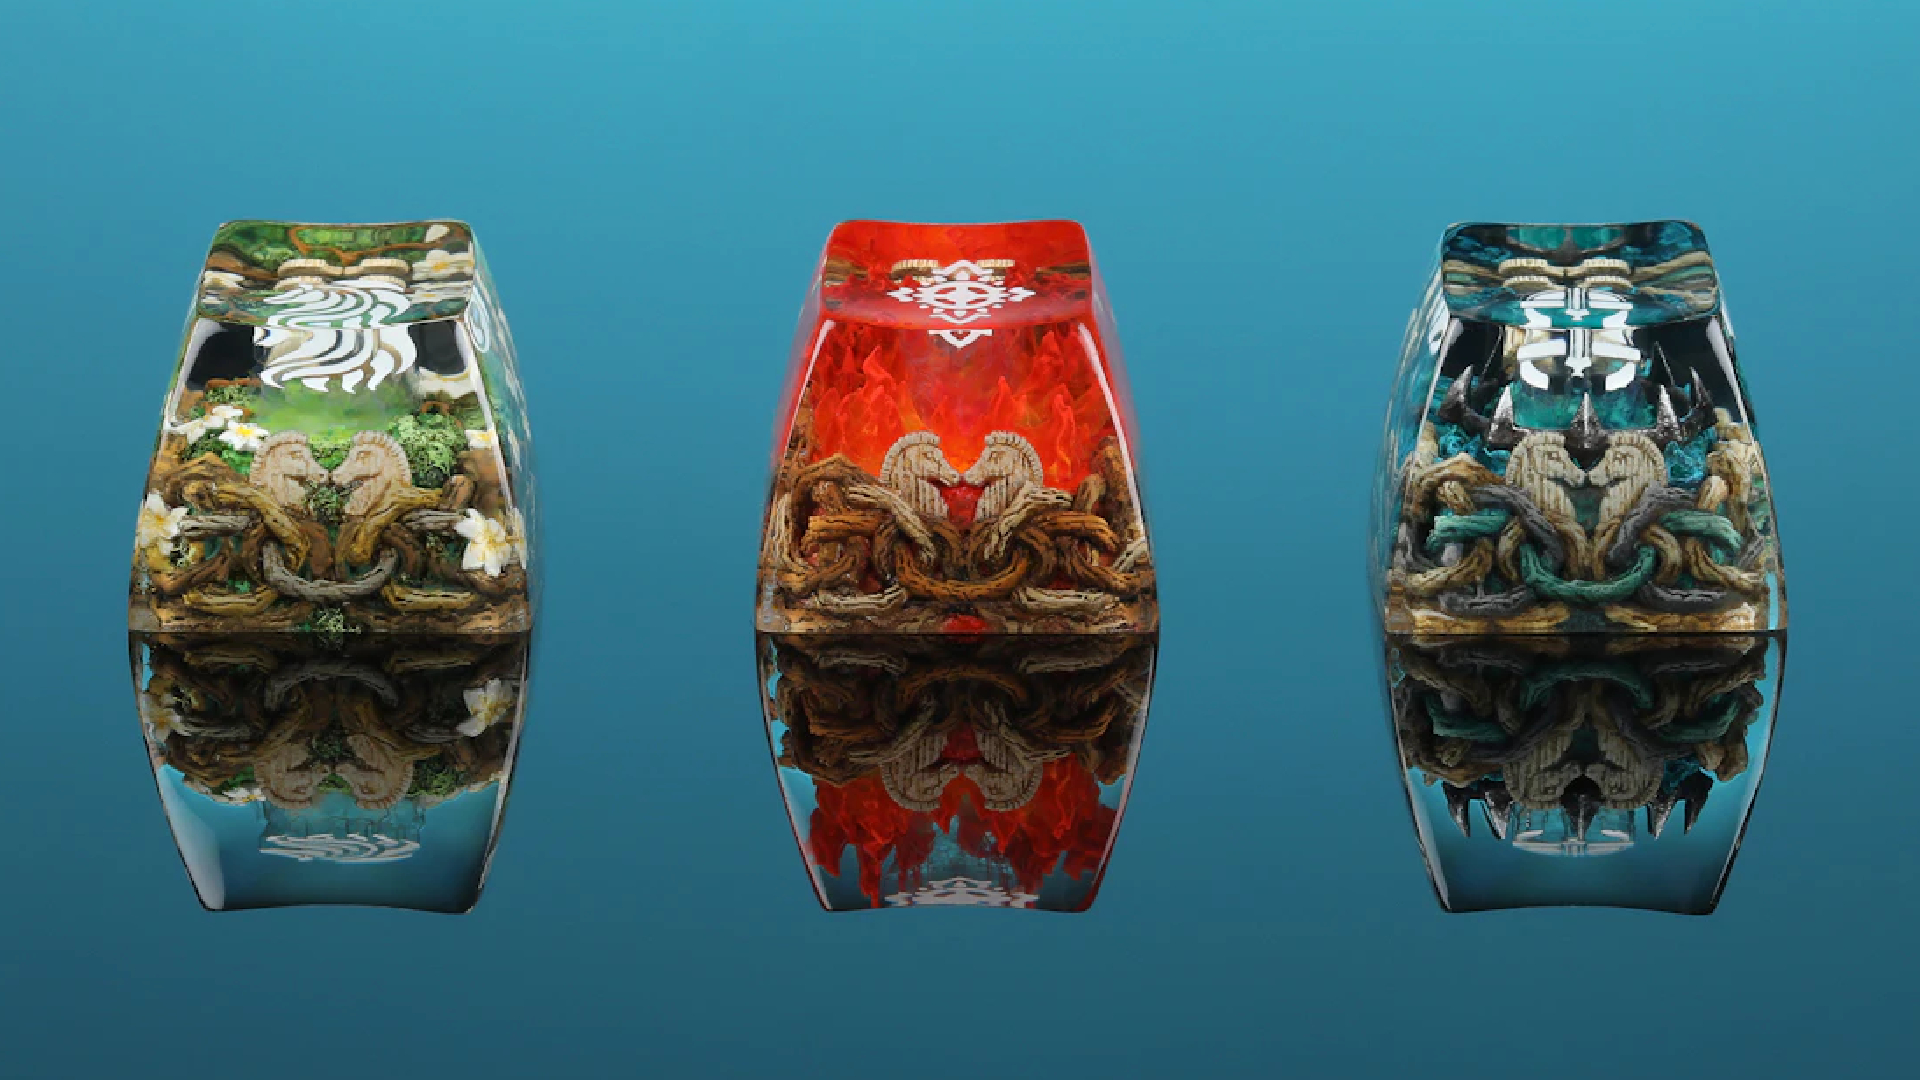  Type, you fools! Drop has new artisan LOTR keycaps available for pre-order and they have my axe 